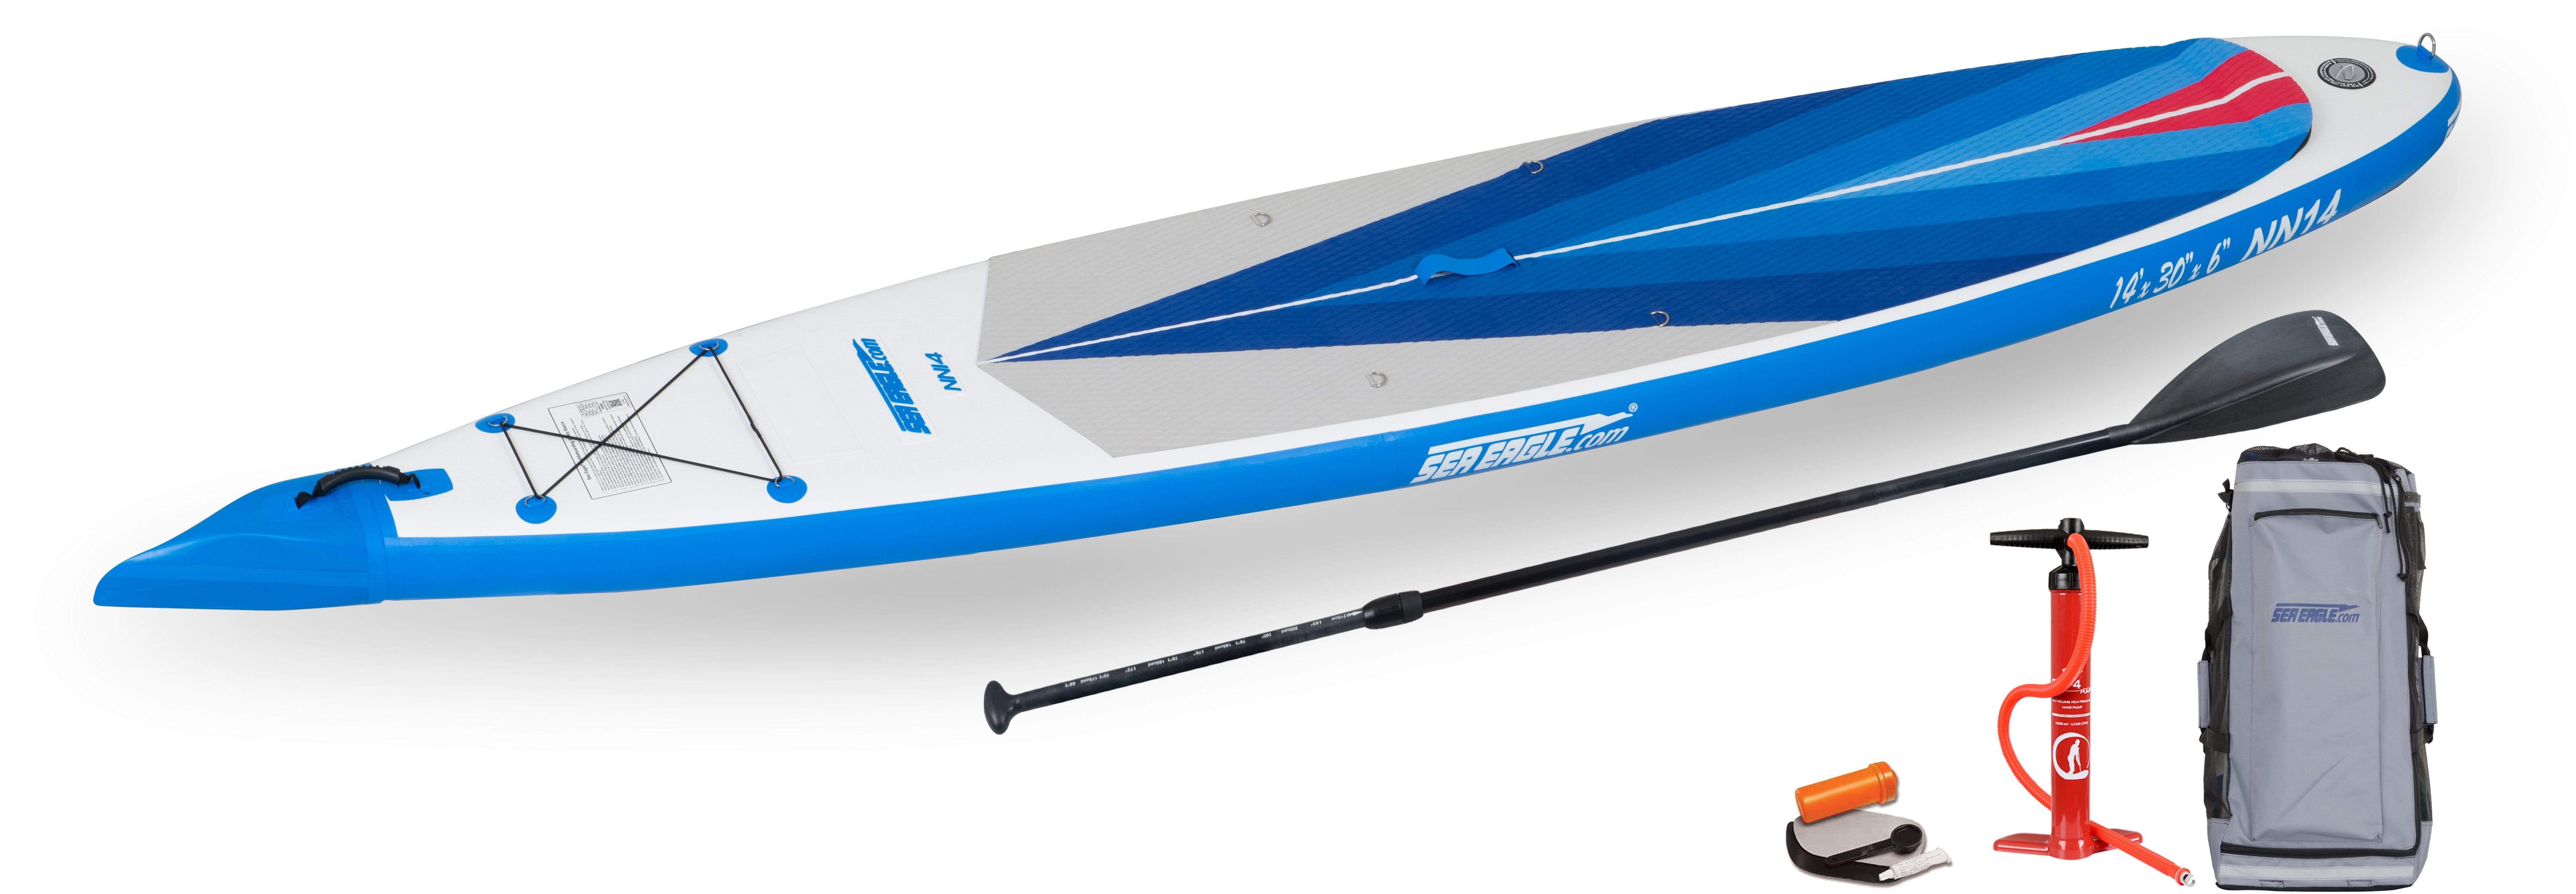 Sea Eagle NN14 Needlenose Inflatable Sup - Start Up Package